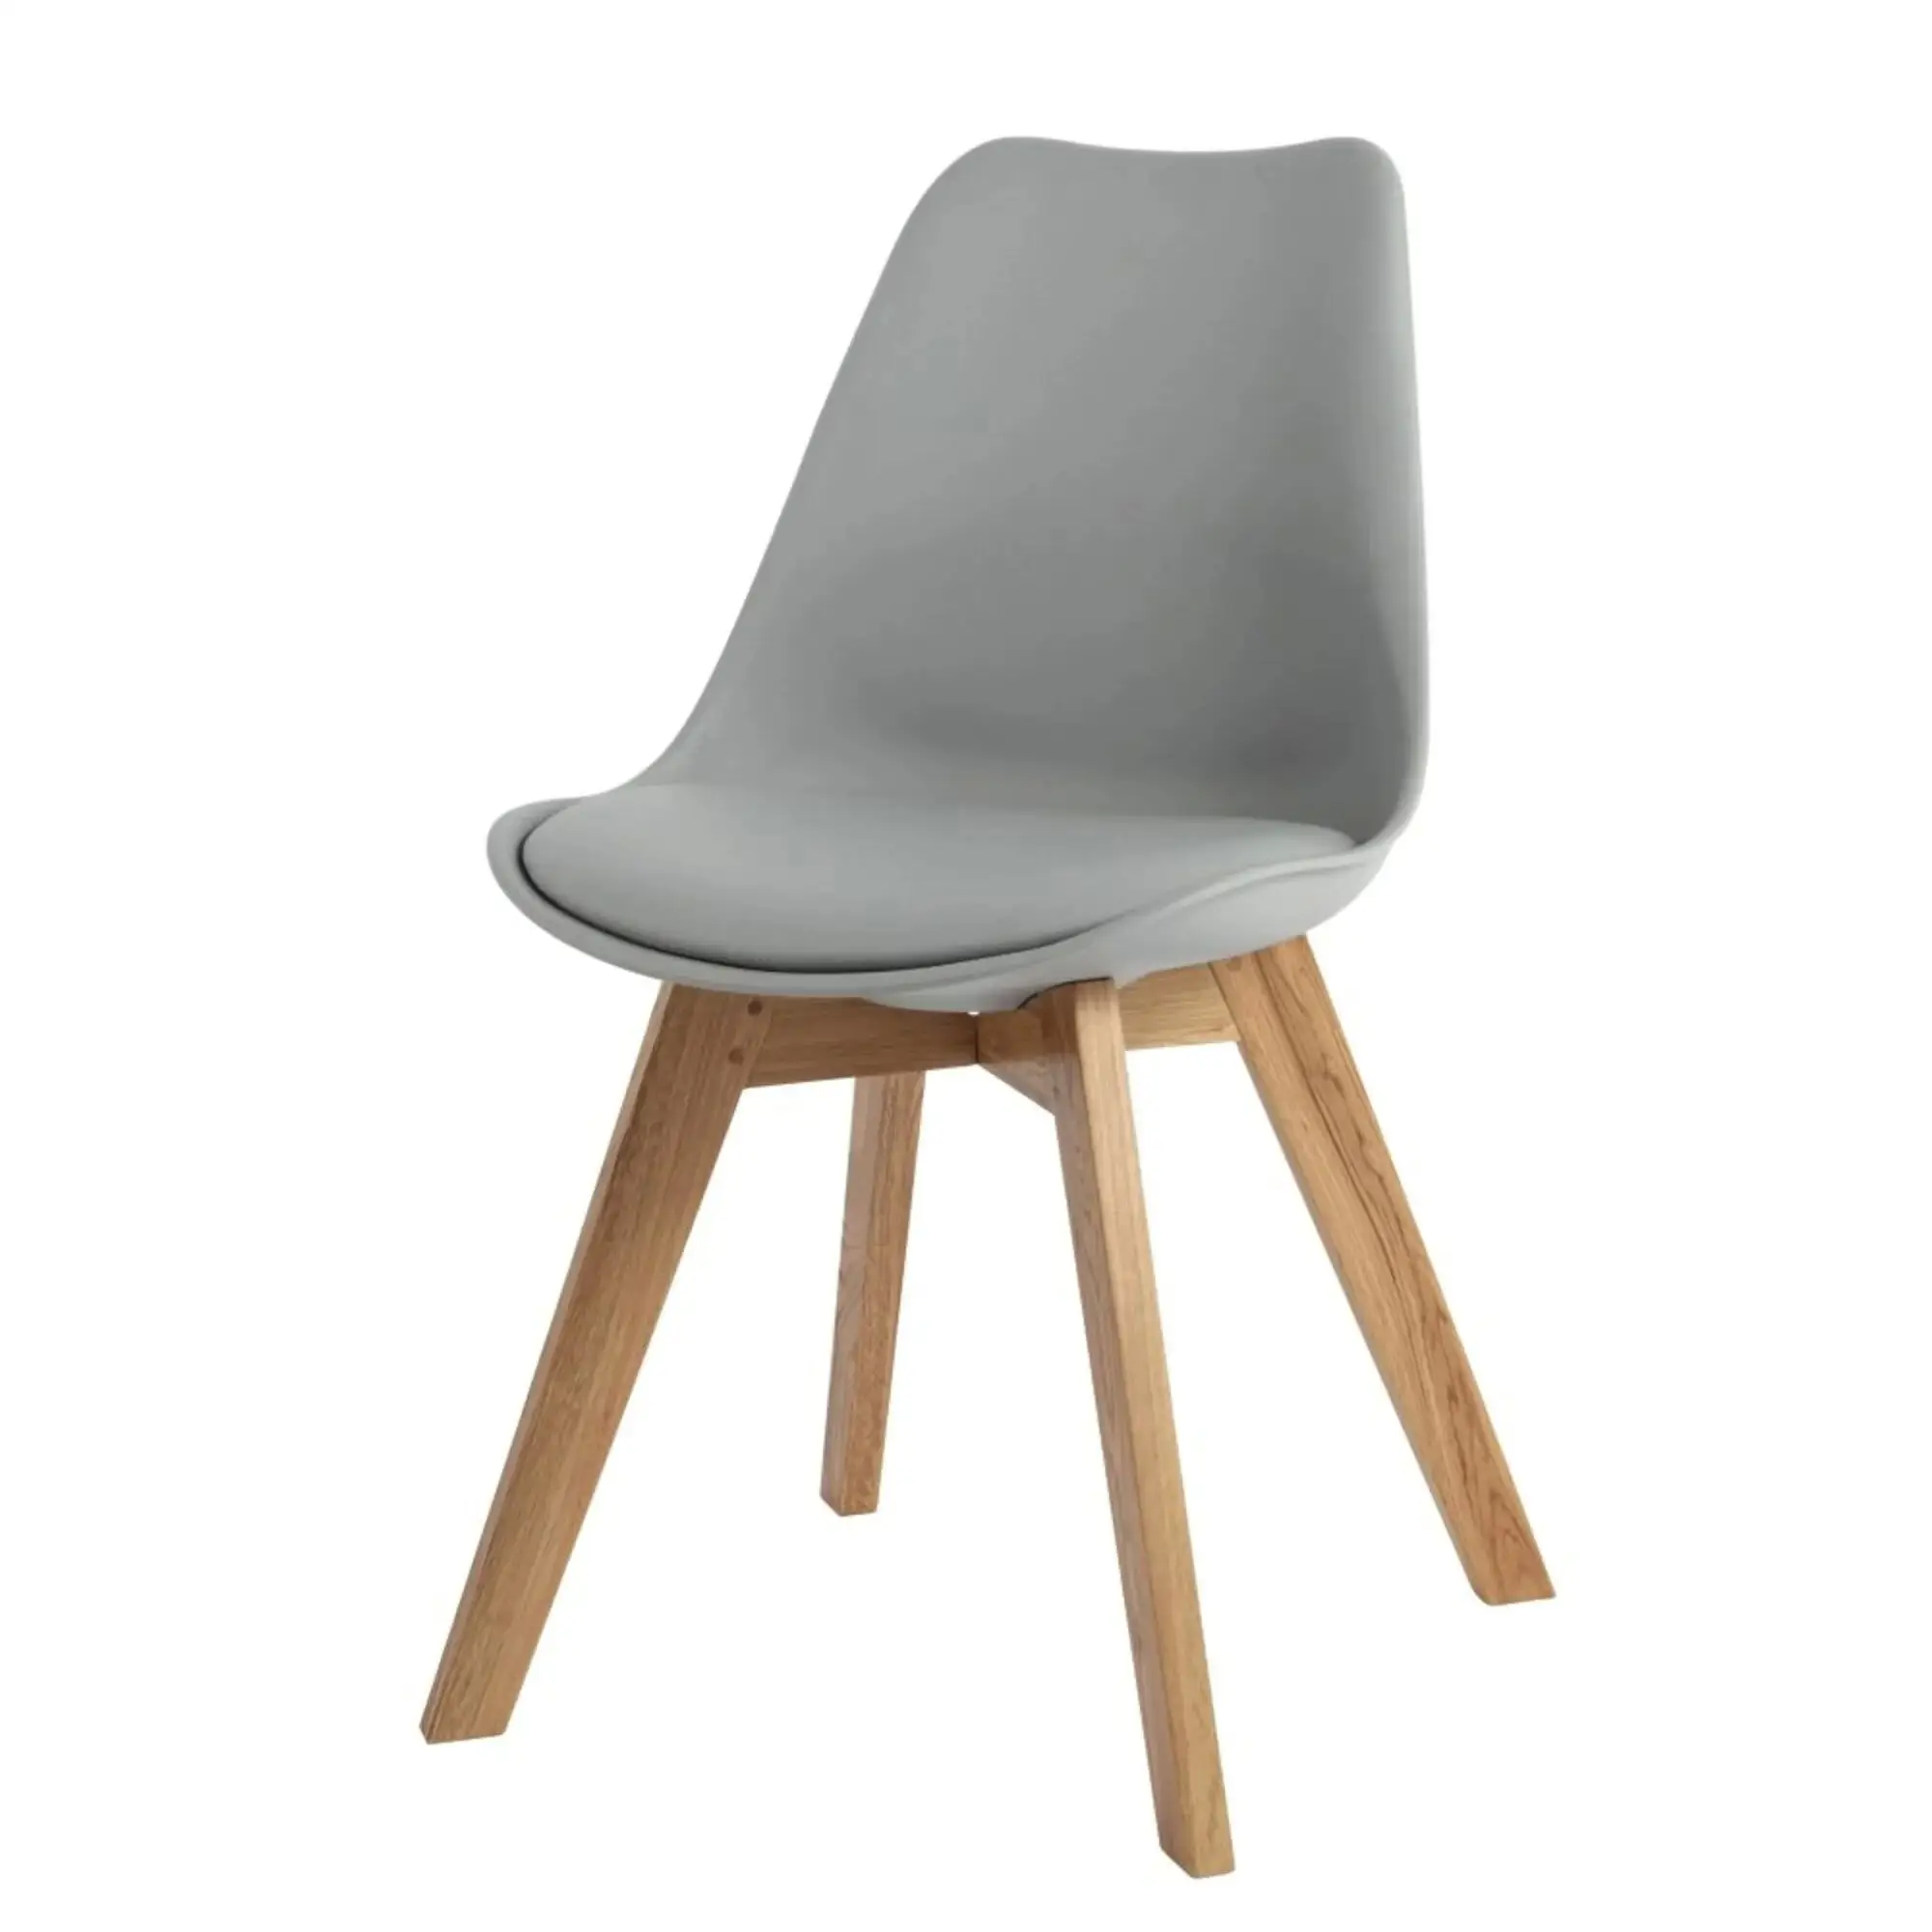 Grey Tulip Chair Scandinavian Plastic Chair with Solid wood legs